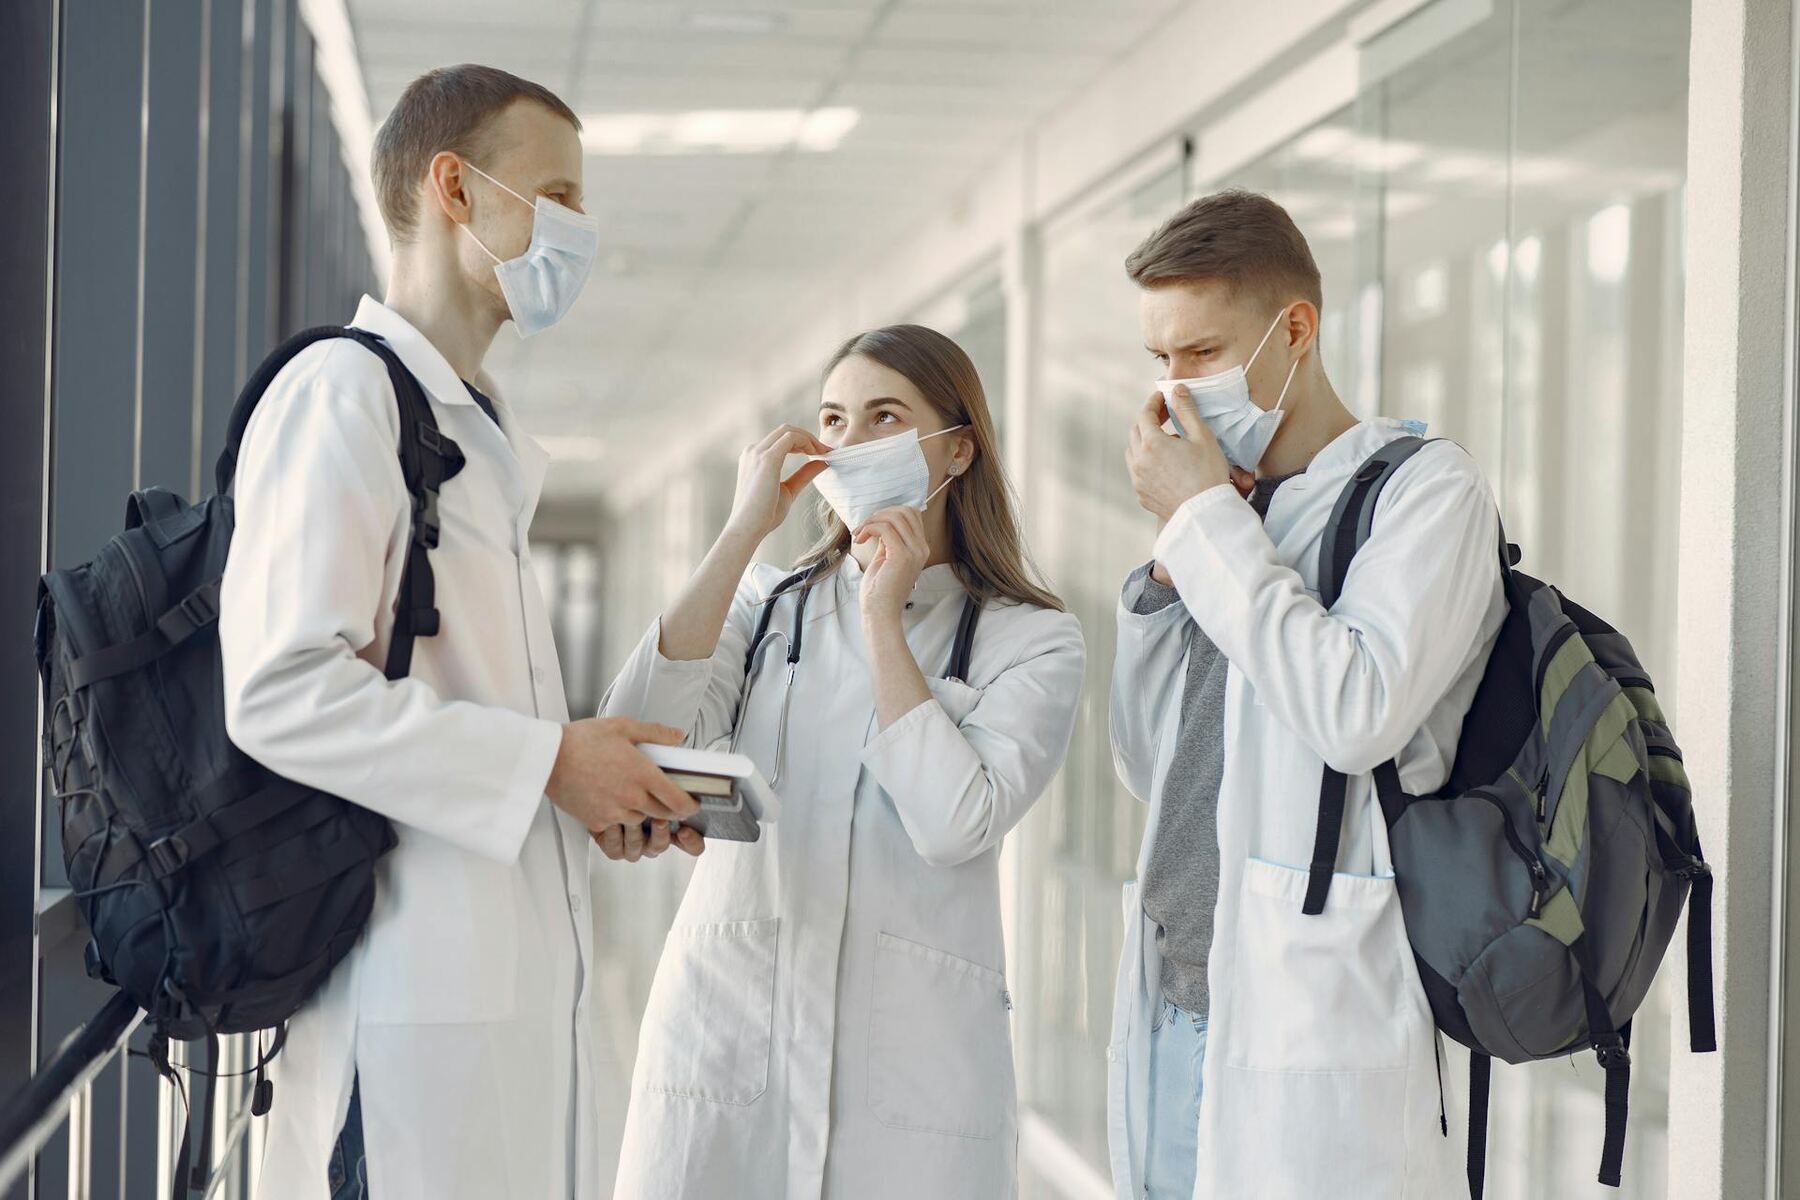 Three medical student in masks holding a book, discussing medical knowledge